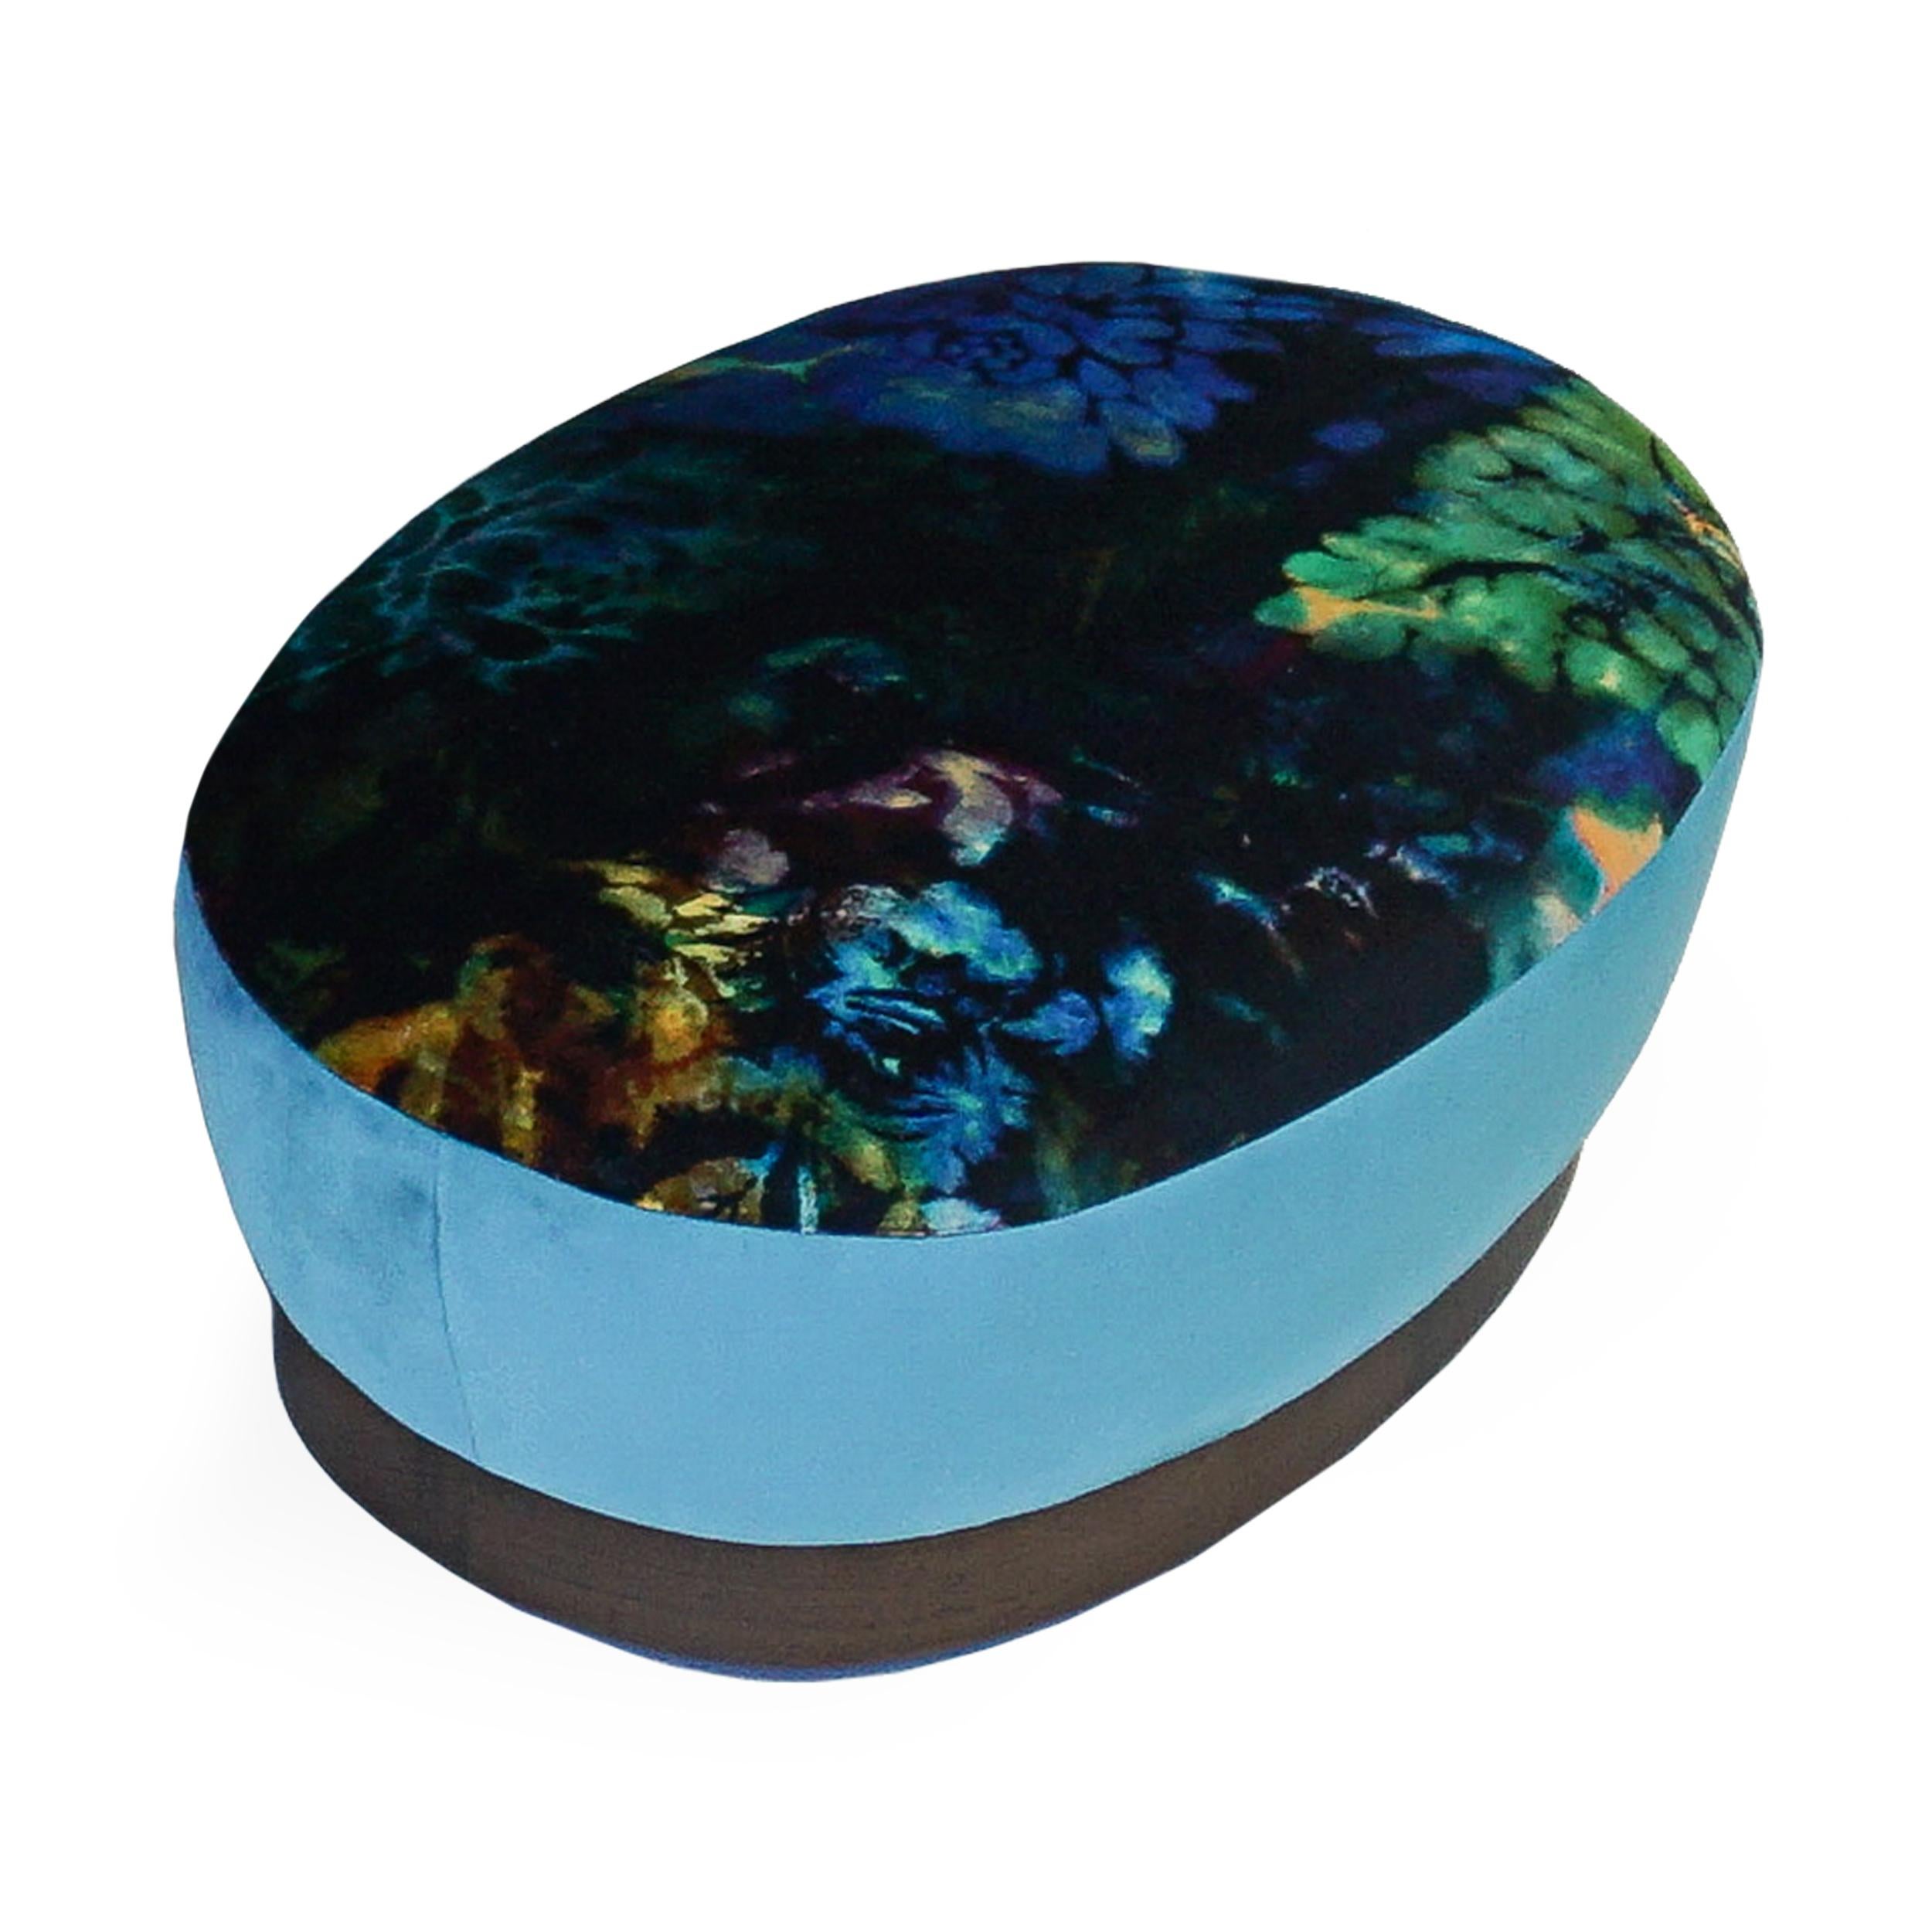 *This piece is referenced in another listing as the accompanying ottoman to a tub lounge chair and is also sold stand-alone. Customize with your own fabrics. Shown in turquoise velvet with psychedelic floral vevlet.

Measurements:
Overall: 21”W x